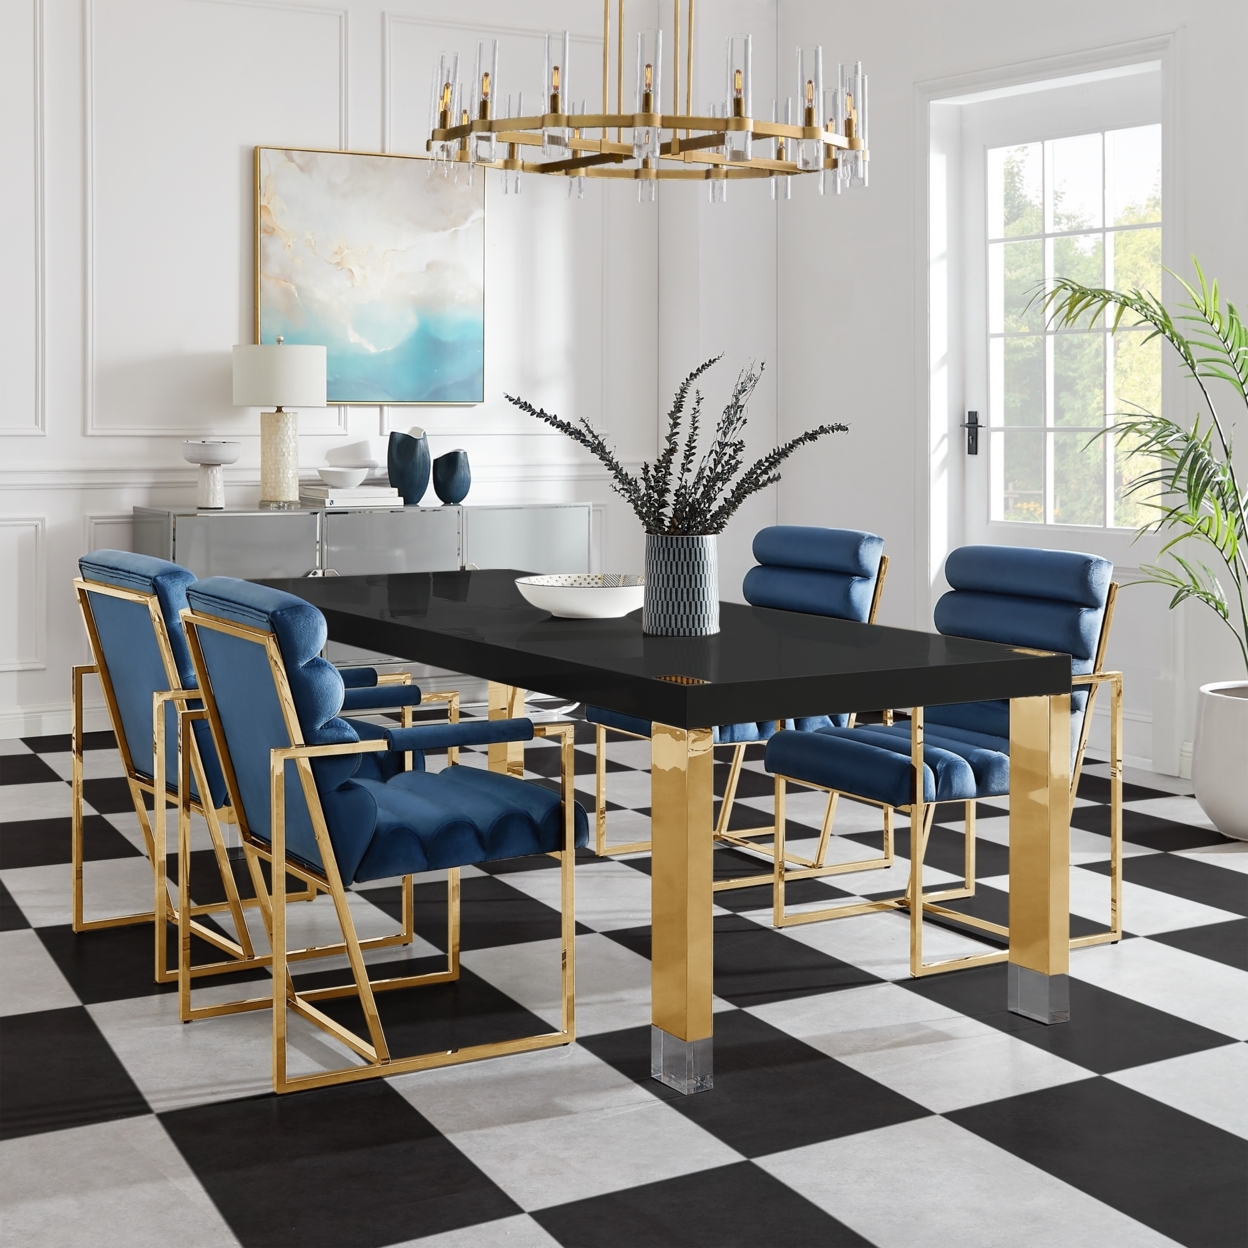 Kaniya Dining Table - Seats Up To 8 People, Stainless Steel Legs, Acrylic Translucent Tips - Black/gold